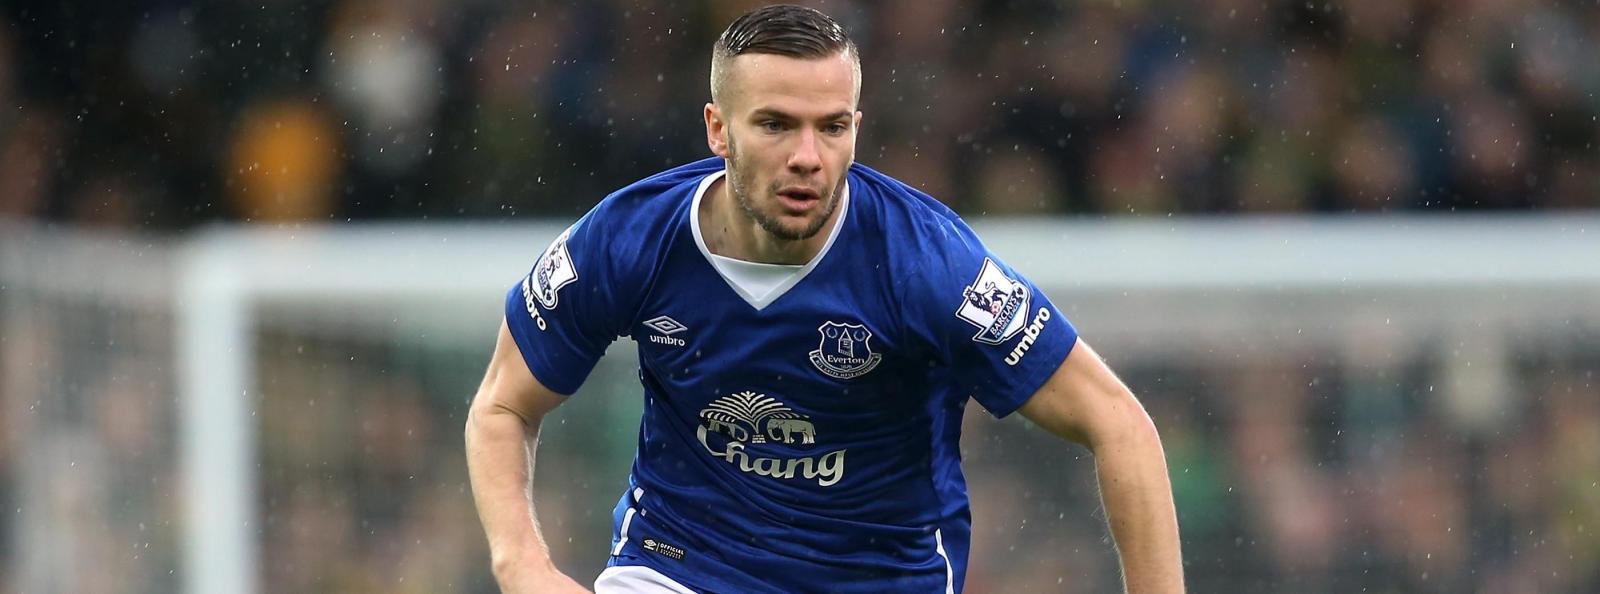 Profile: Everton midfielder and former Manchester United man, Tom Cleverley